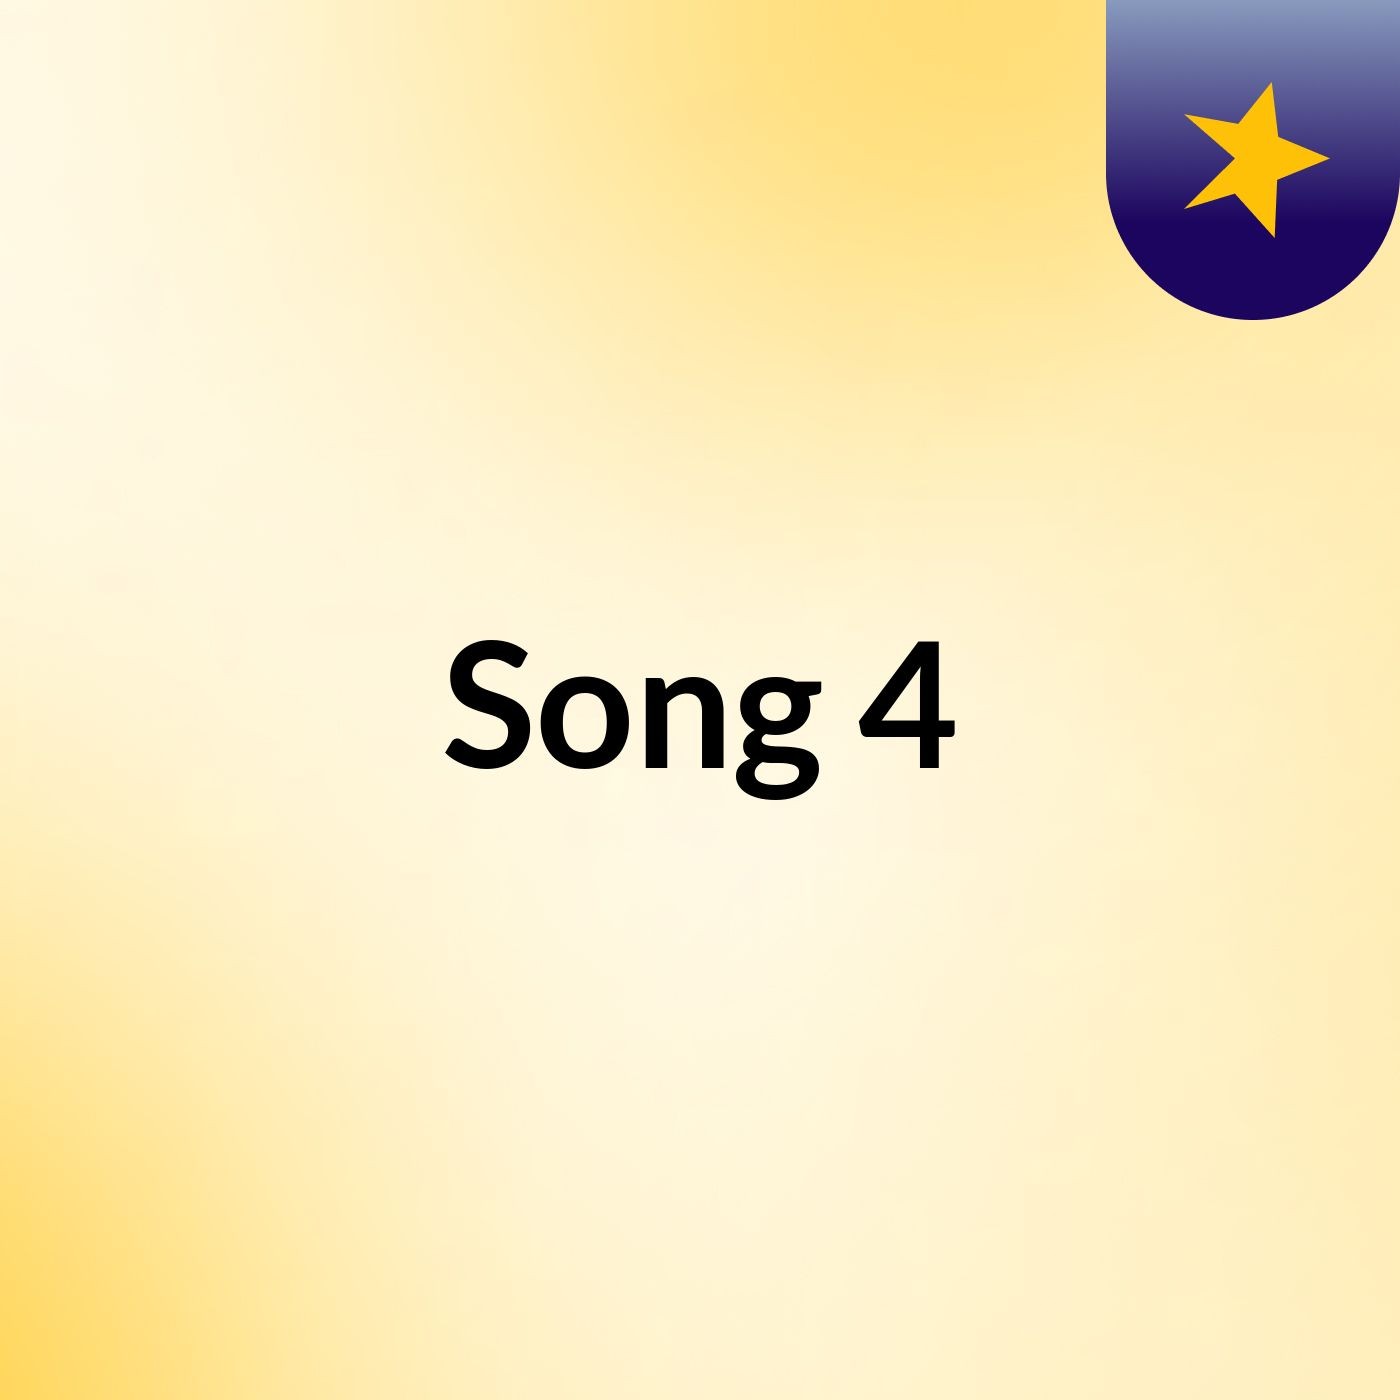 Song 4